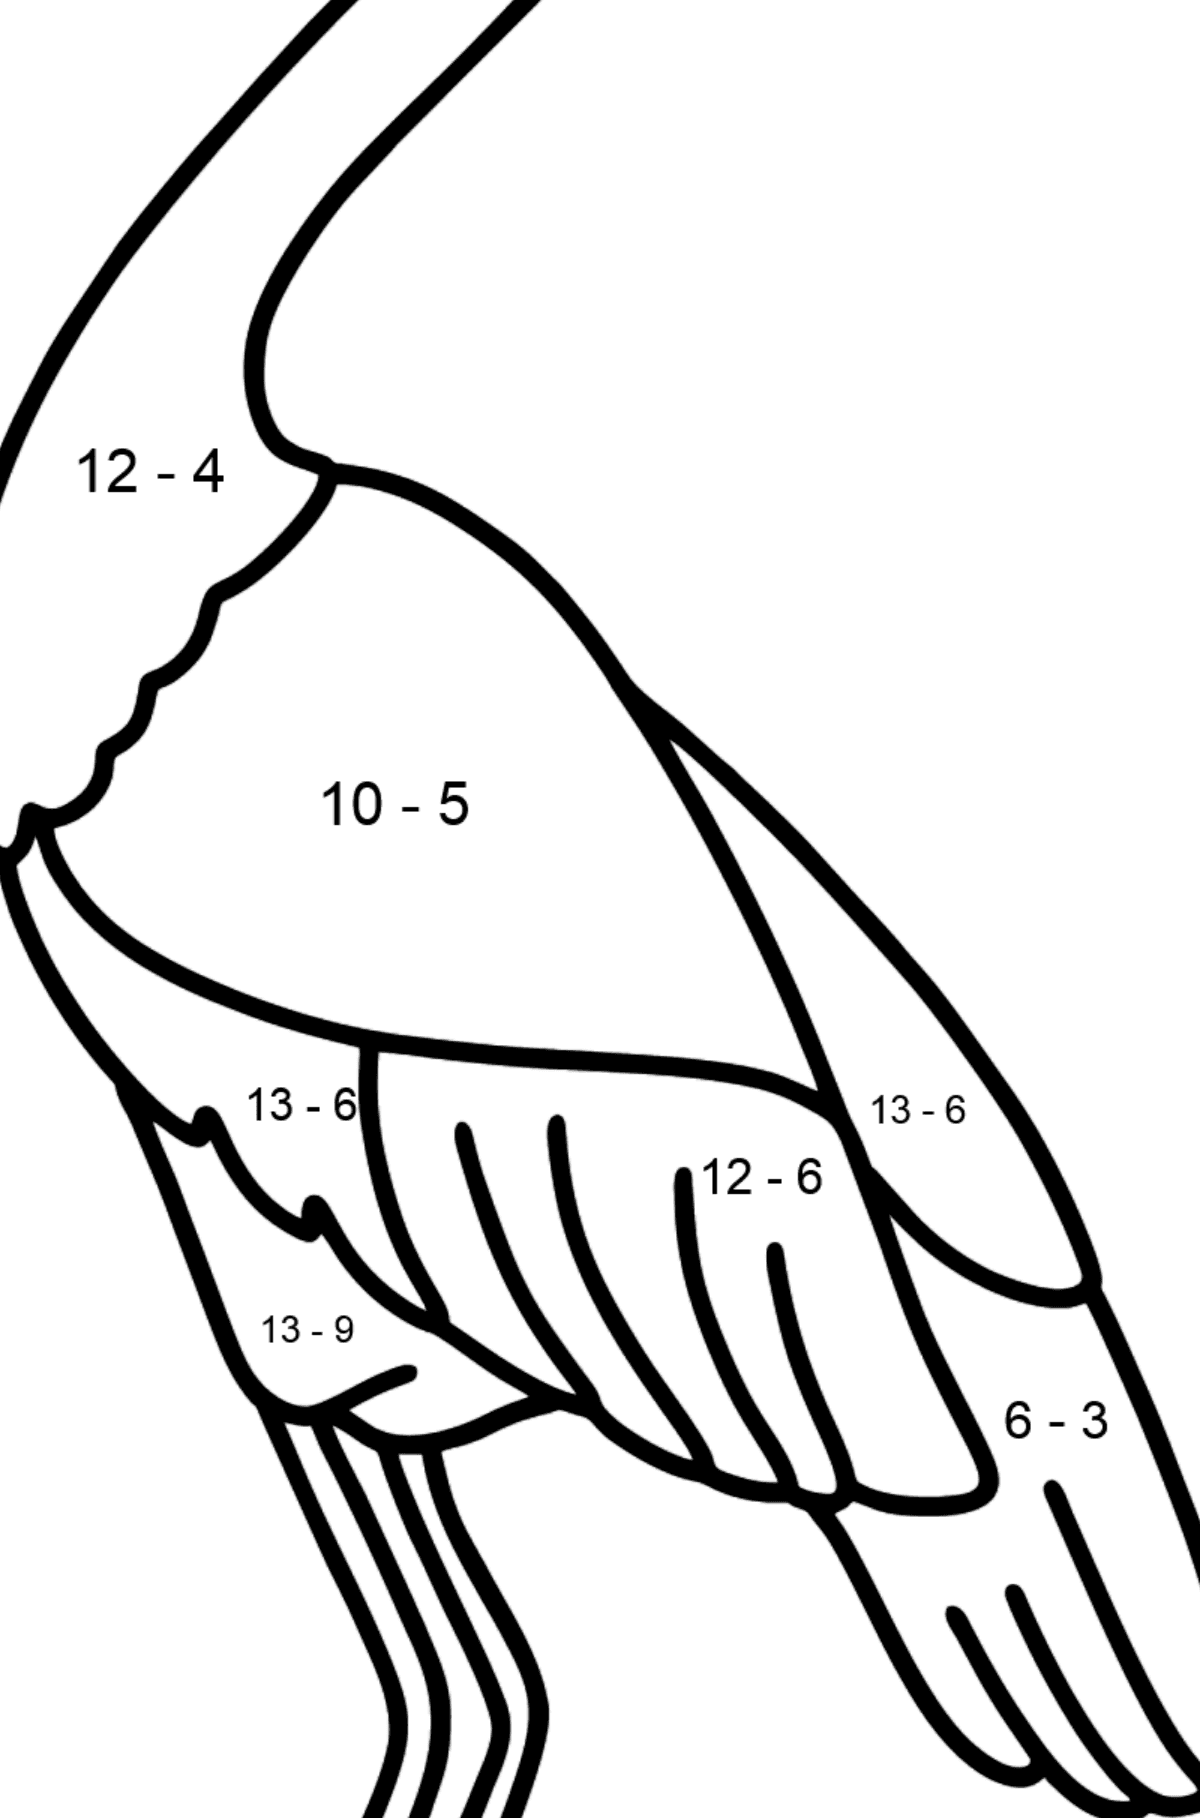 Stork coloring page - Math Coloring - Subtraction for Kids